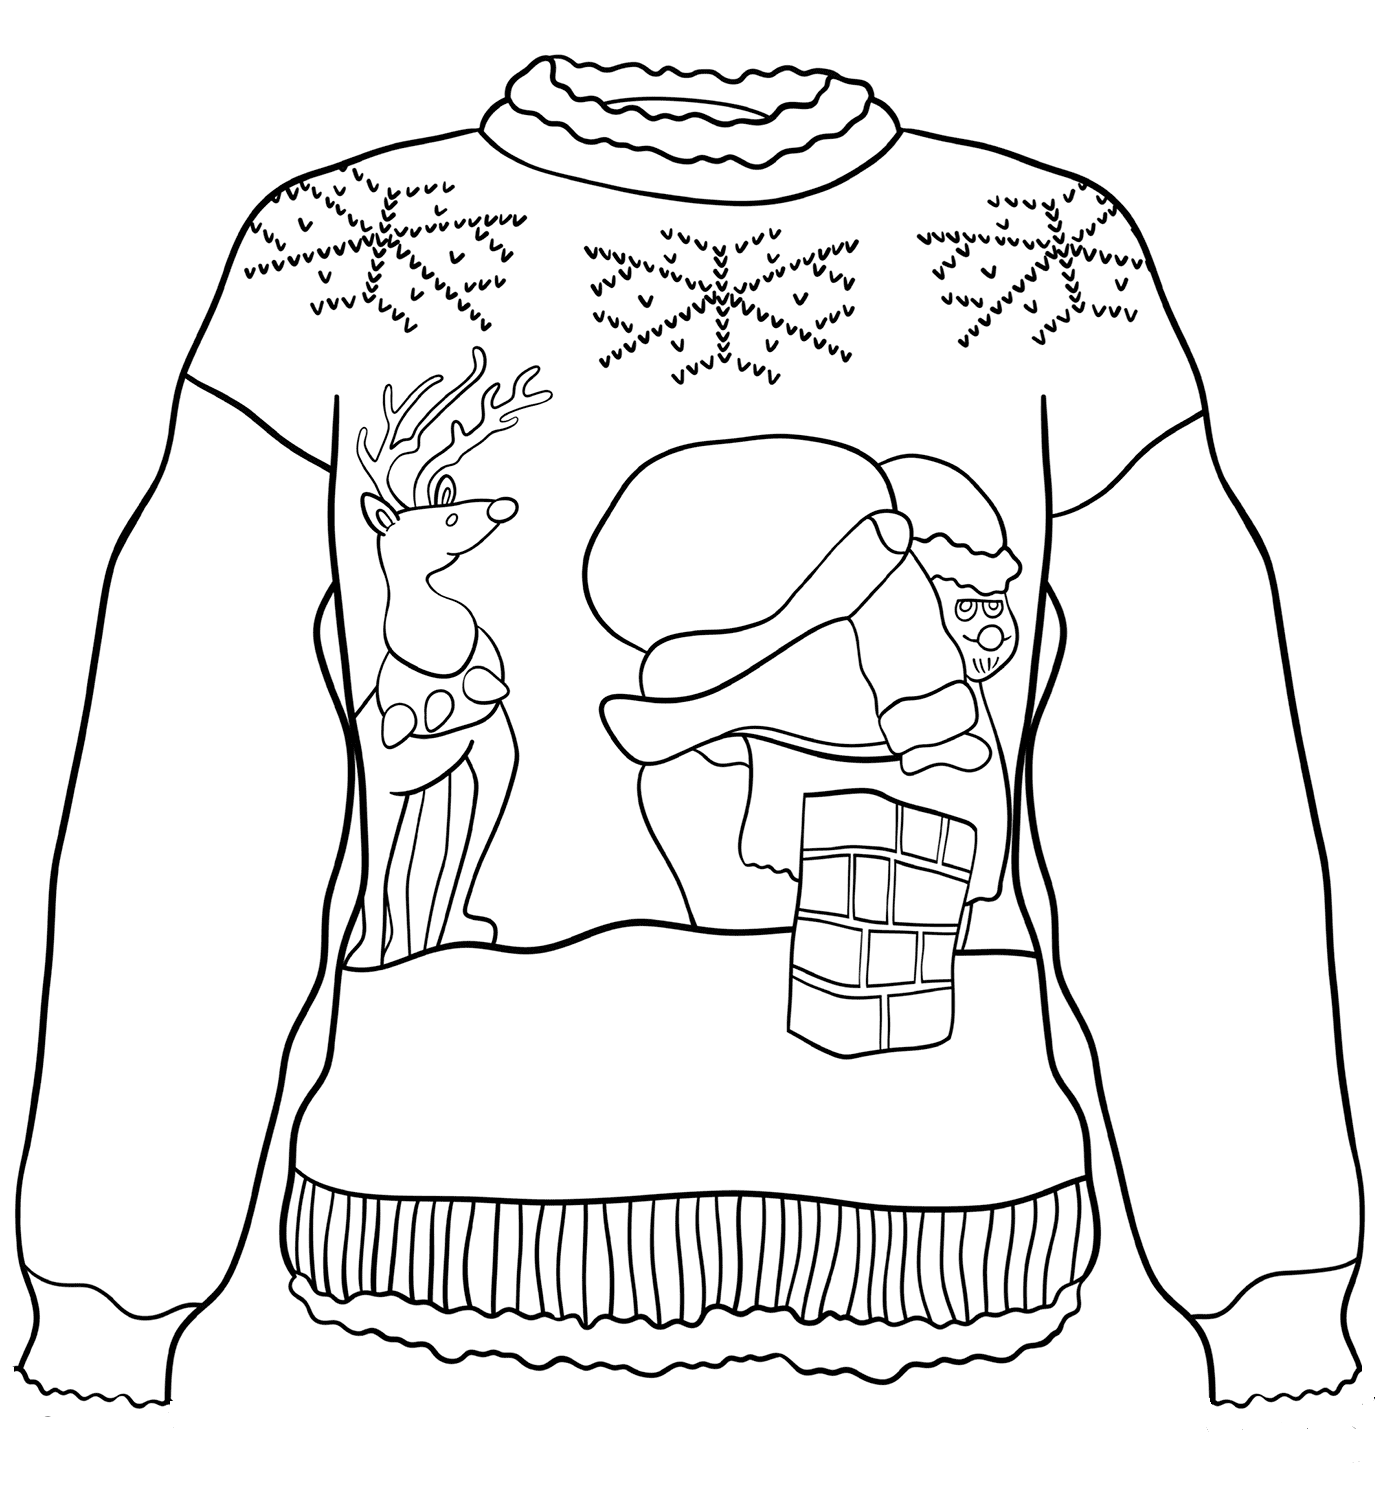 printable-ugly-sweater-coloring-page-customize-and-print